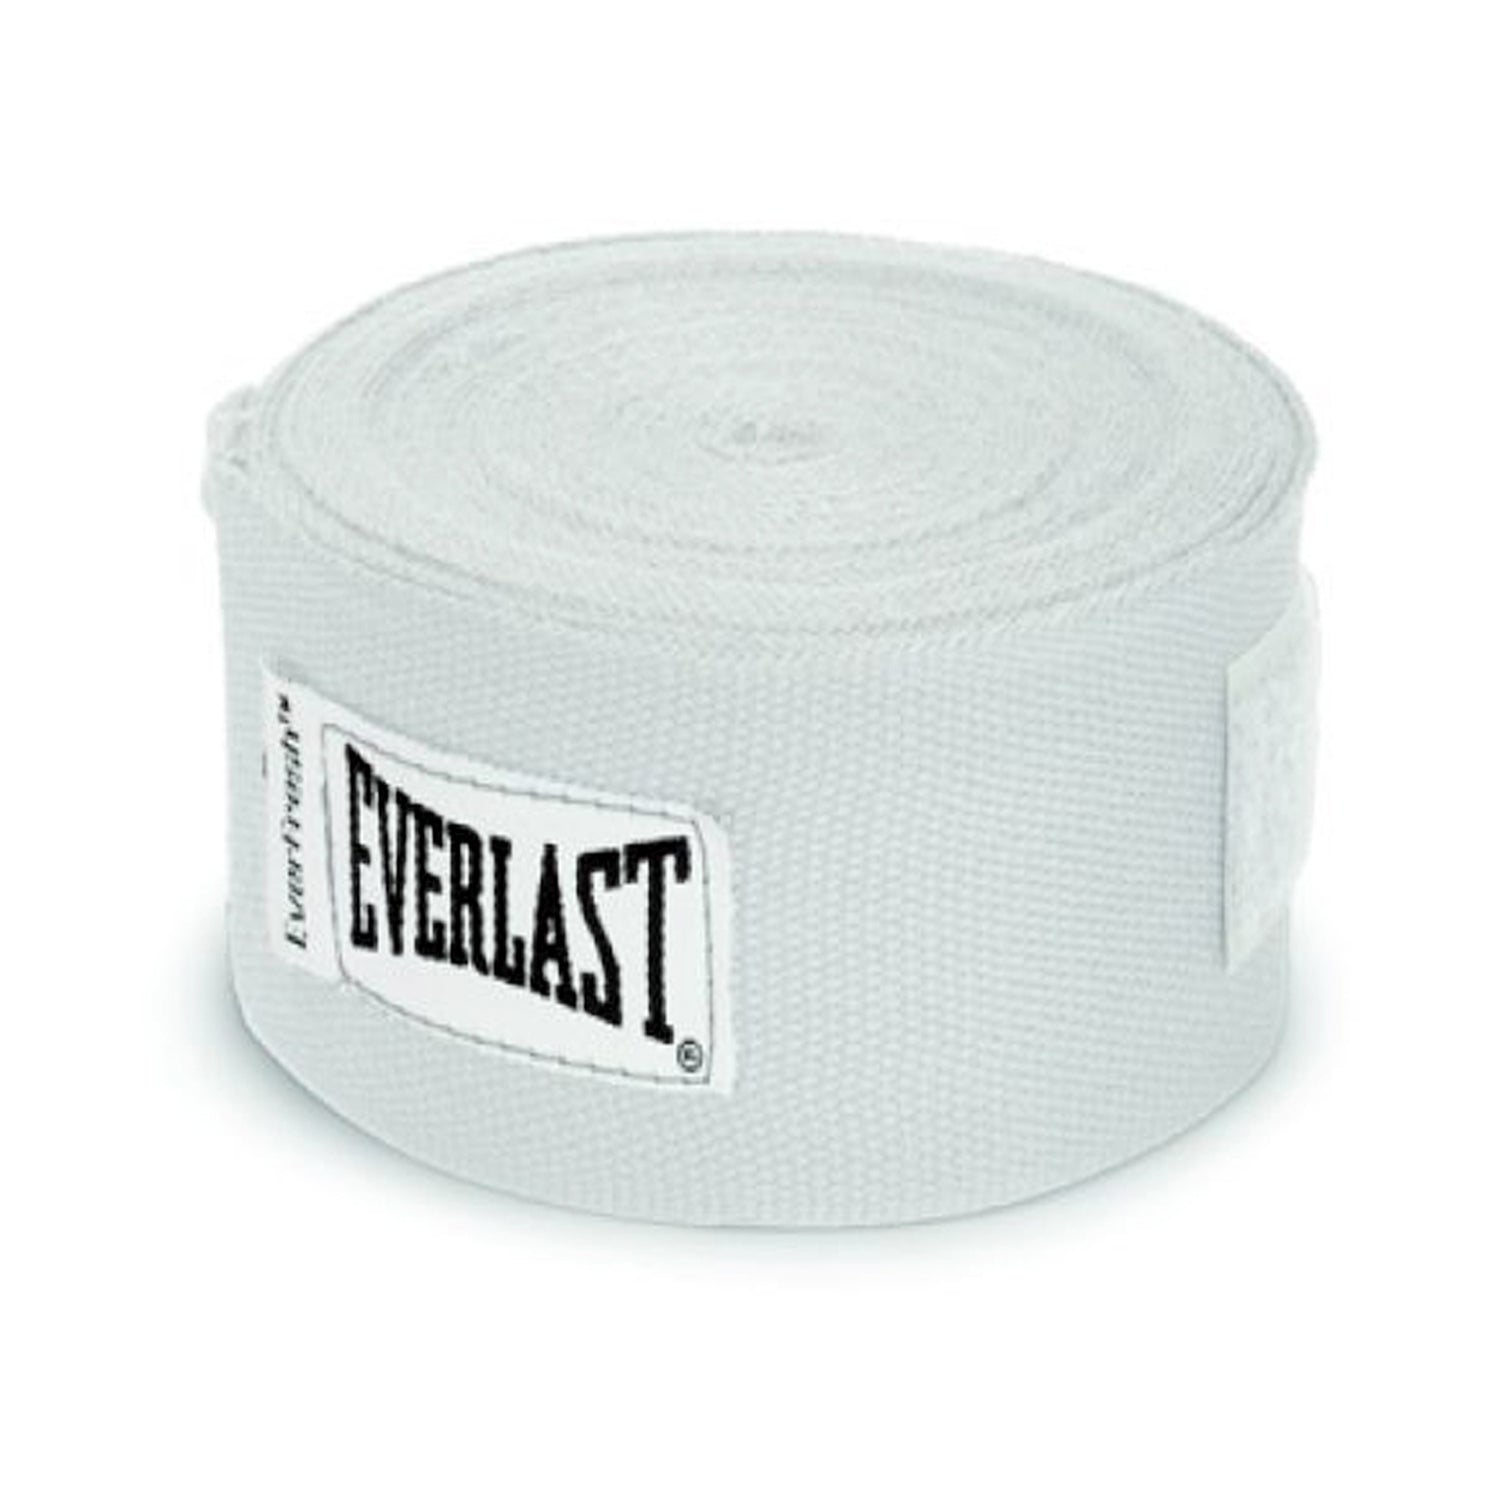 Everlast 4457 Pro Style Boxing Hand Wrap, 120 Inches - White ...